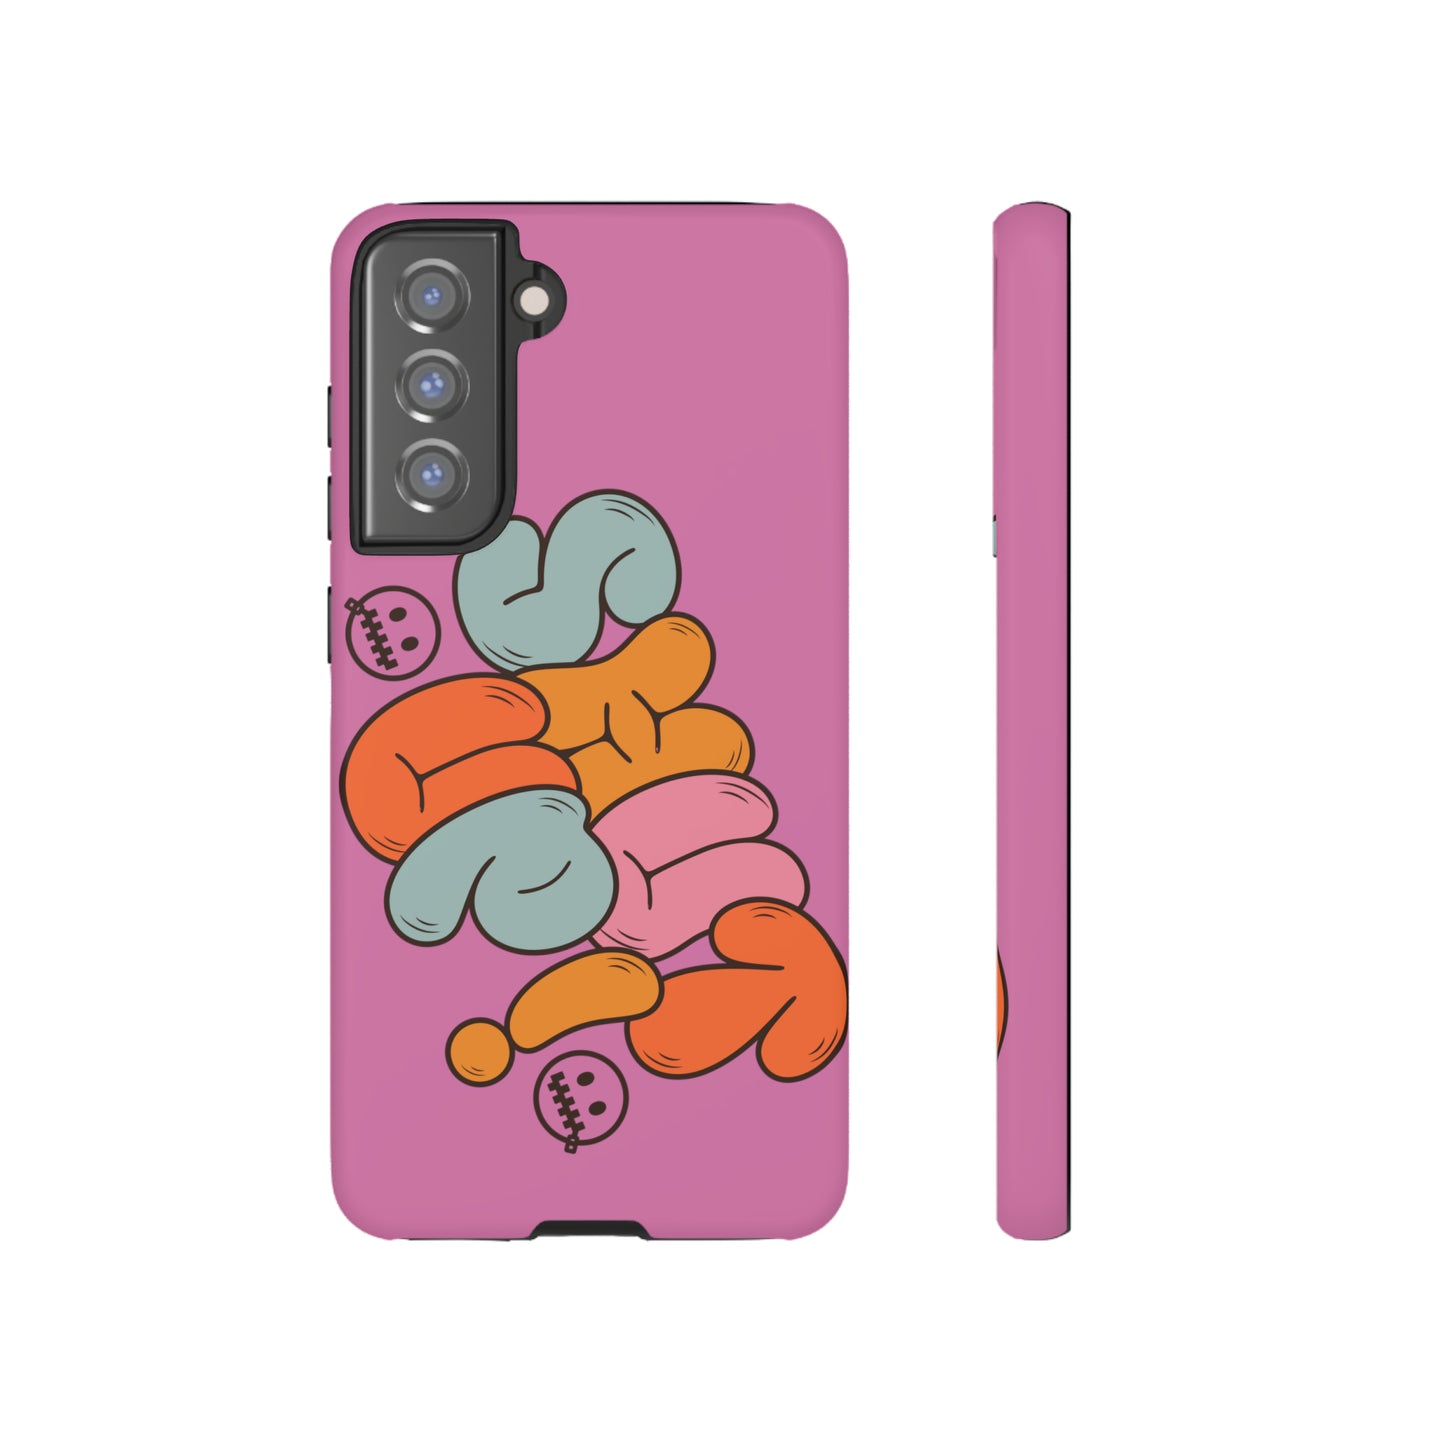 Shut Up Phone Case | Warm Retro Psychedelic Colors | For iPhone, Pixel, Samsung